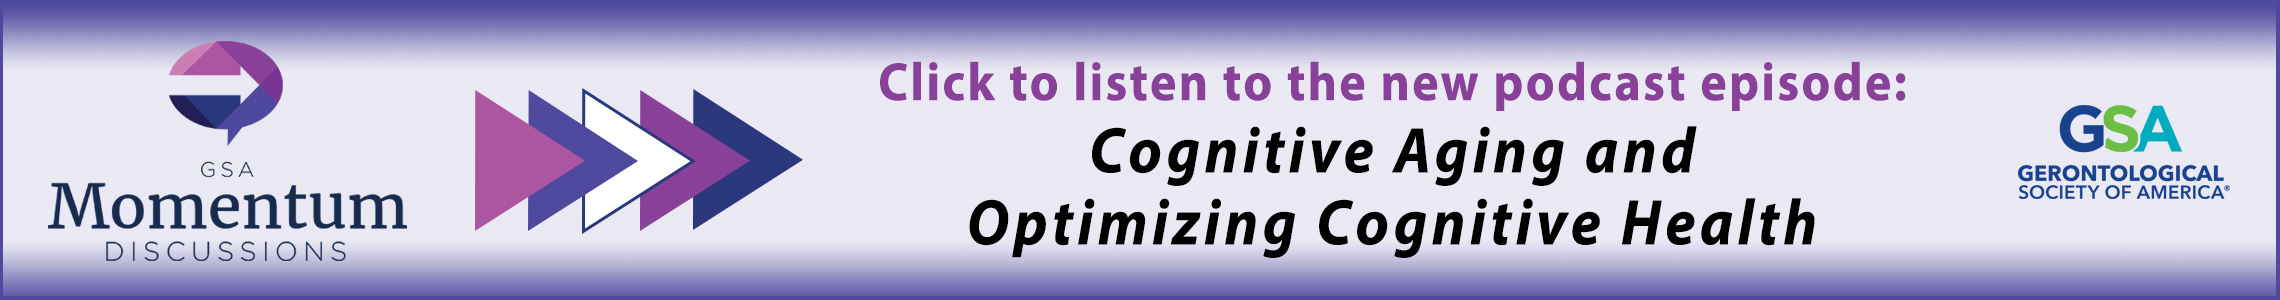 Cognitive Aging and Optimizing Cognitive Health